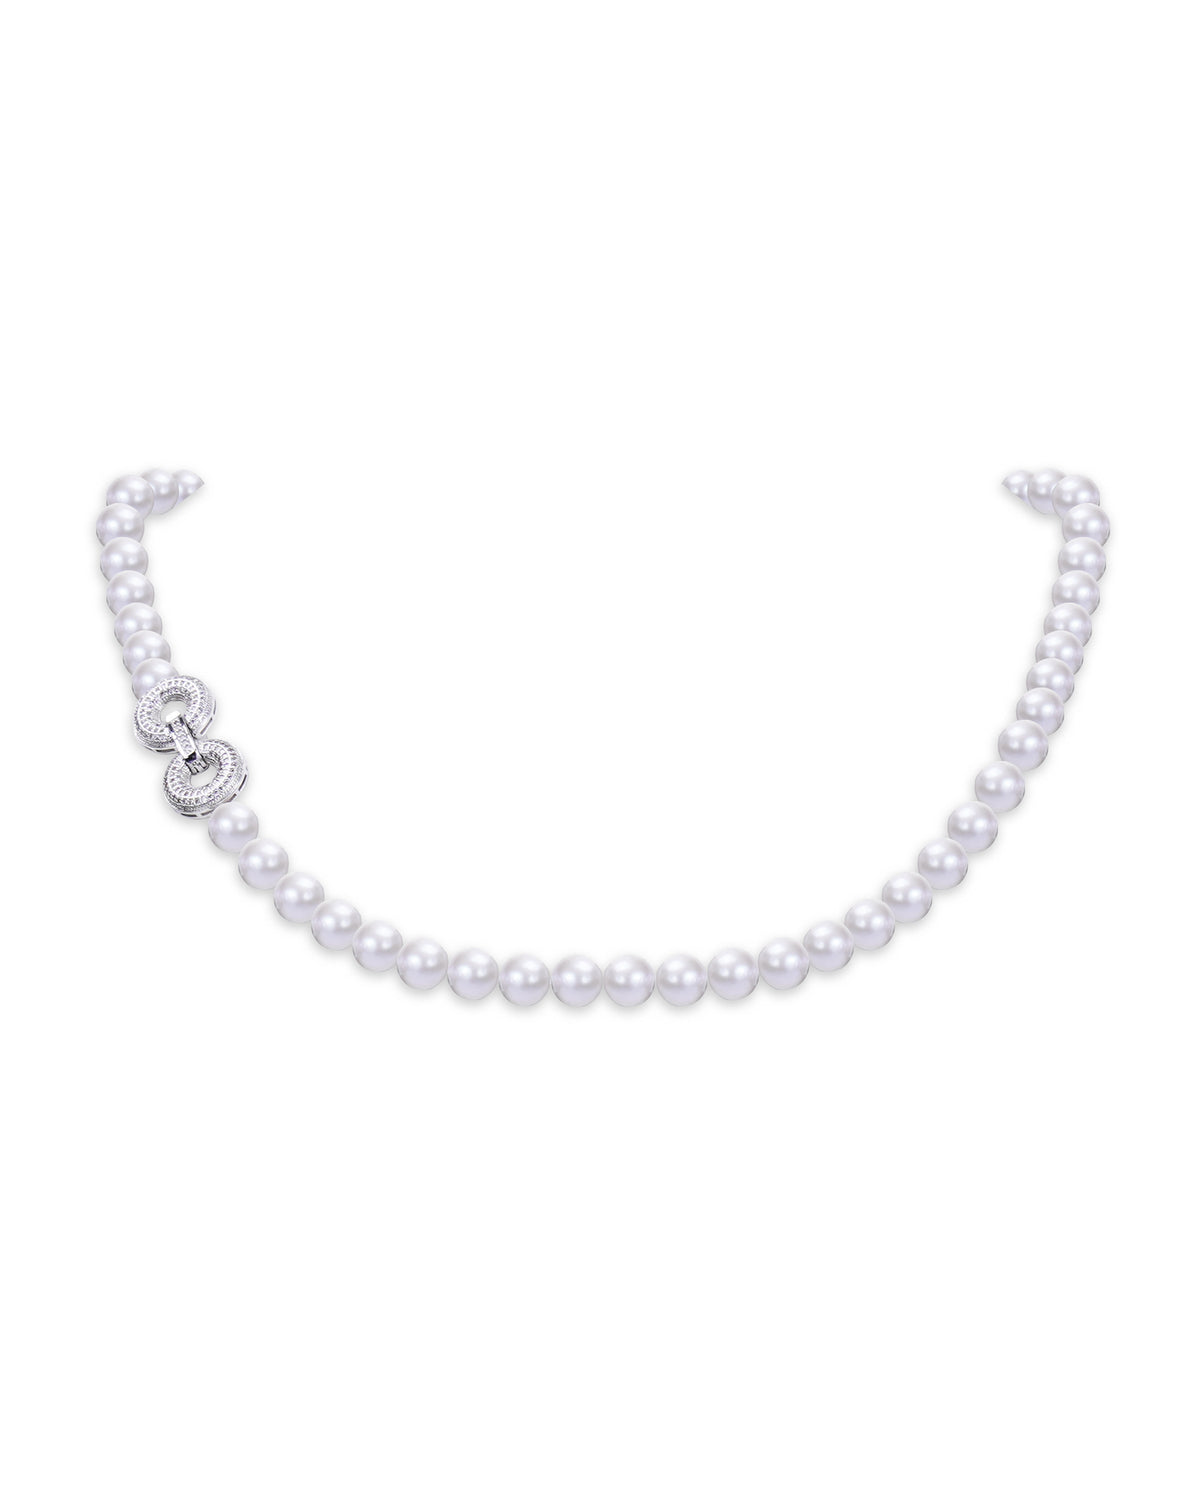 9.5mm White Freshwater Pearl Matinee Necklace